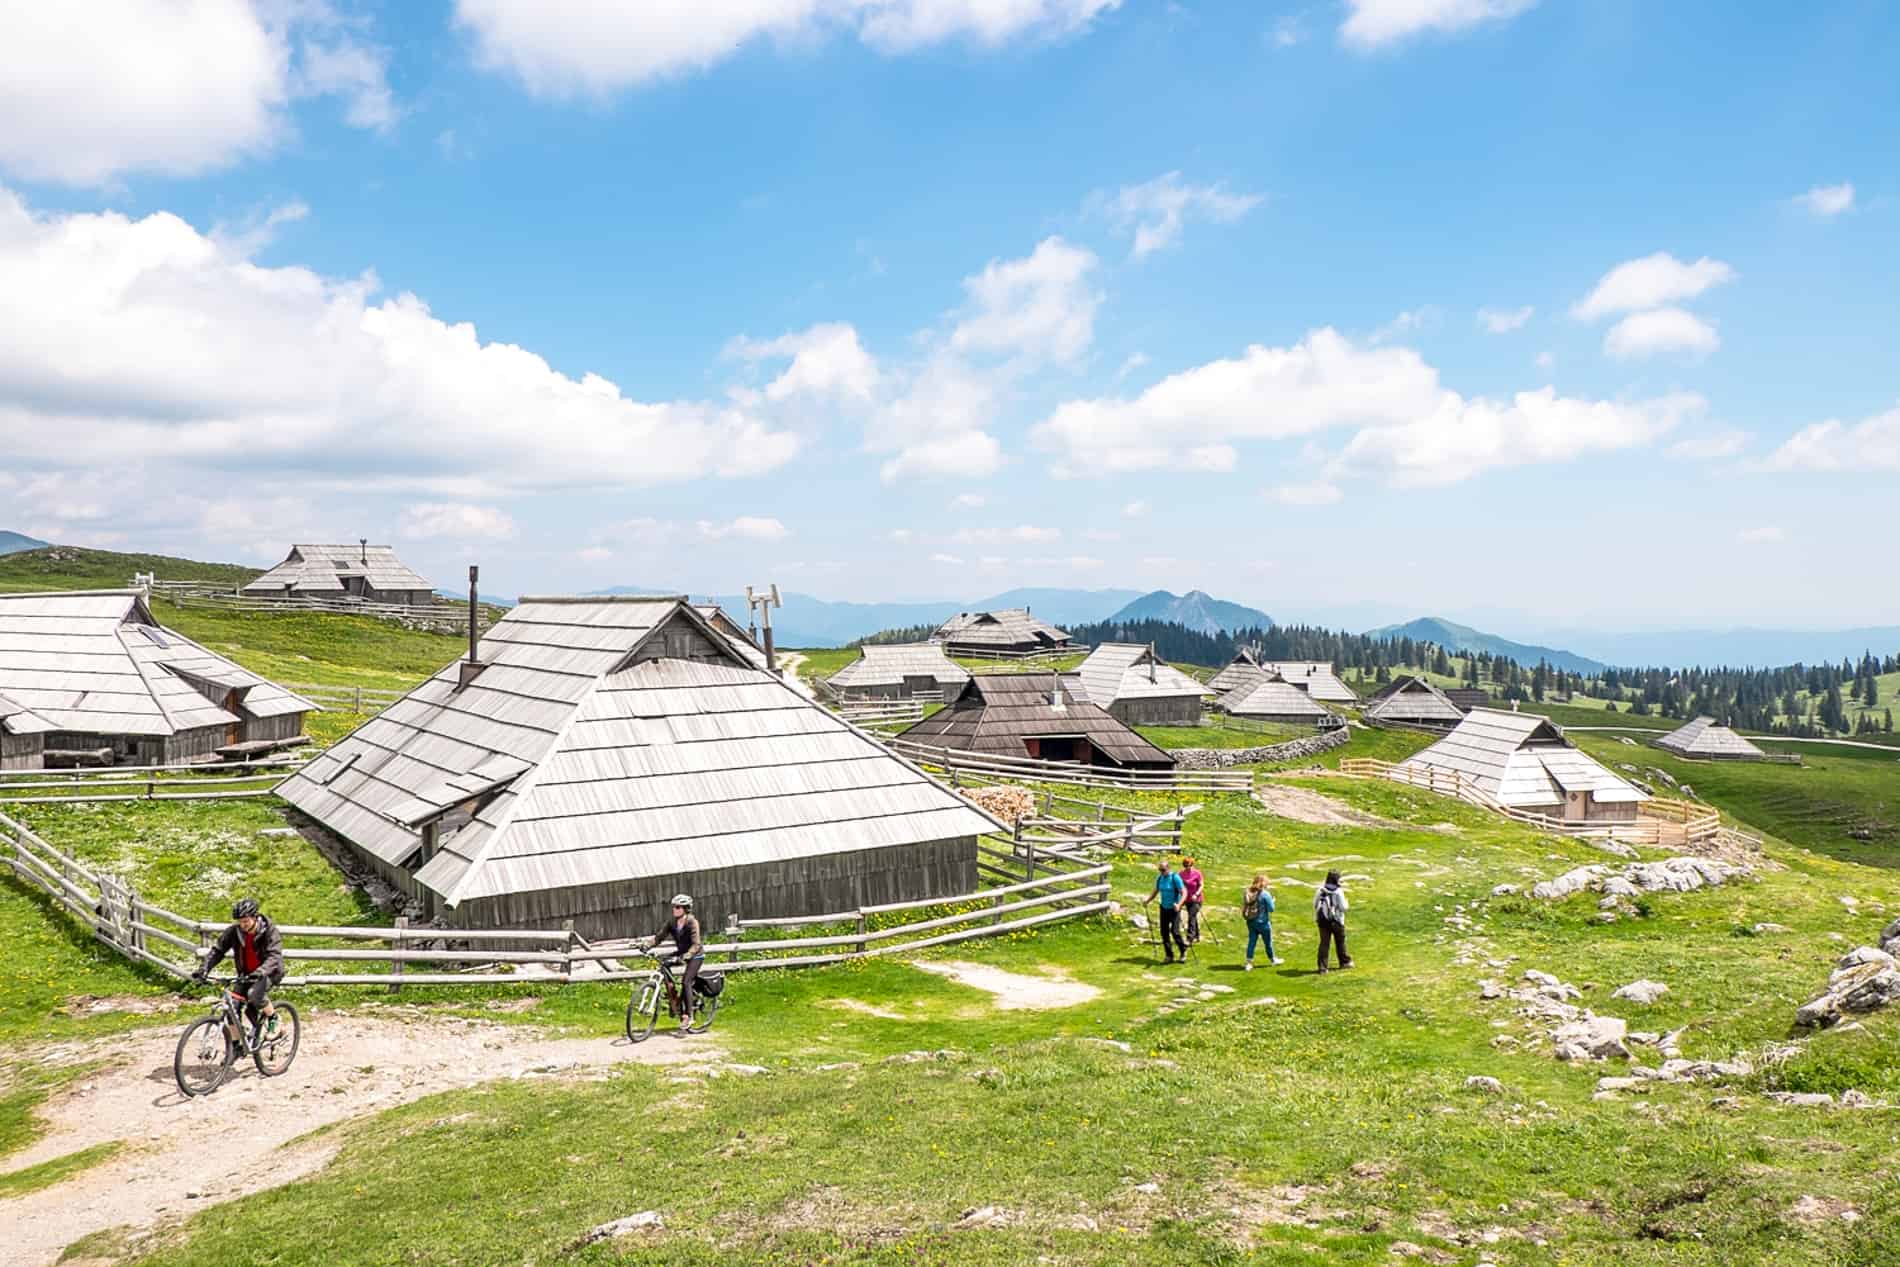 People visiting the unique silver triangular houses of the Velika Planina Shepherd Settlement in Slovenia. 